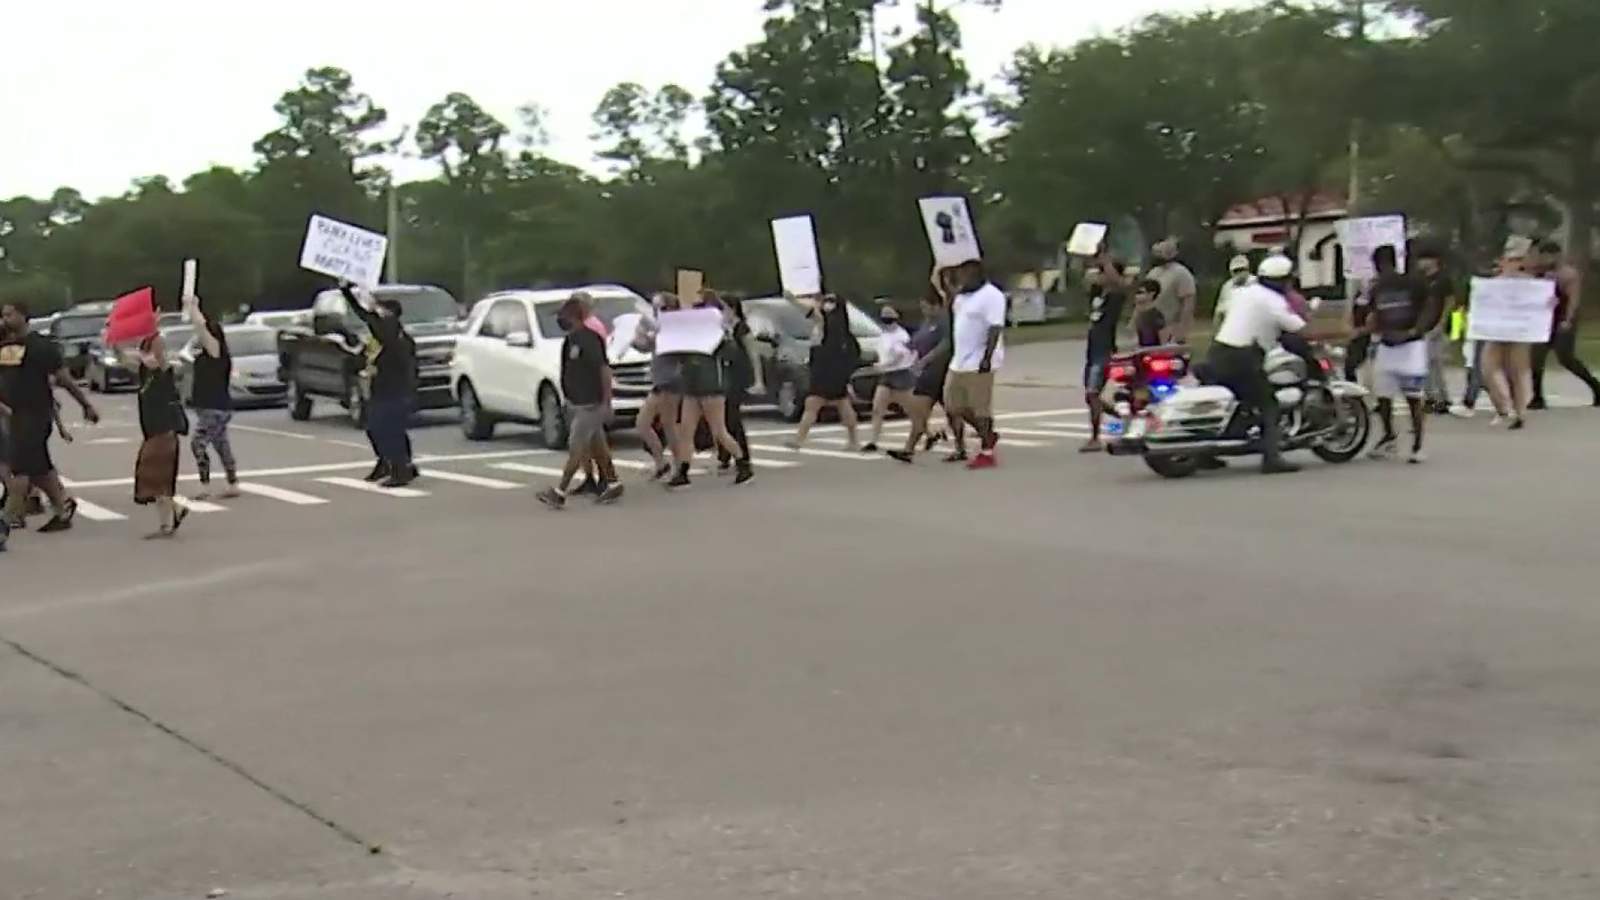 More than 100 Palm Coast protesters peacefully demonstrate following George Floyd’s death